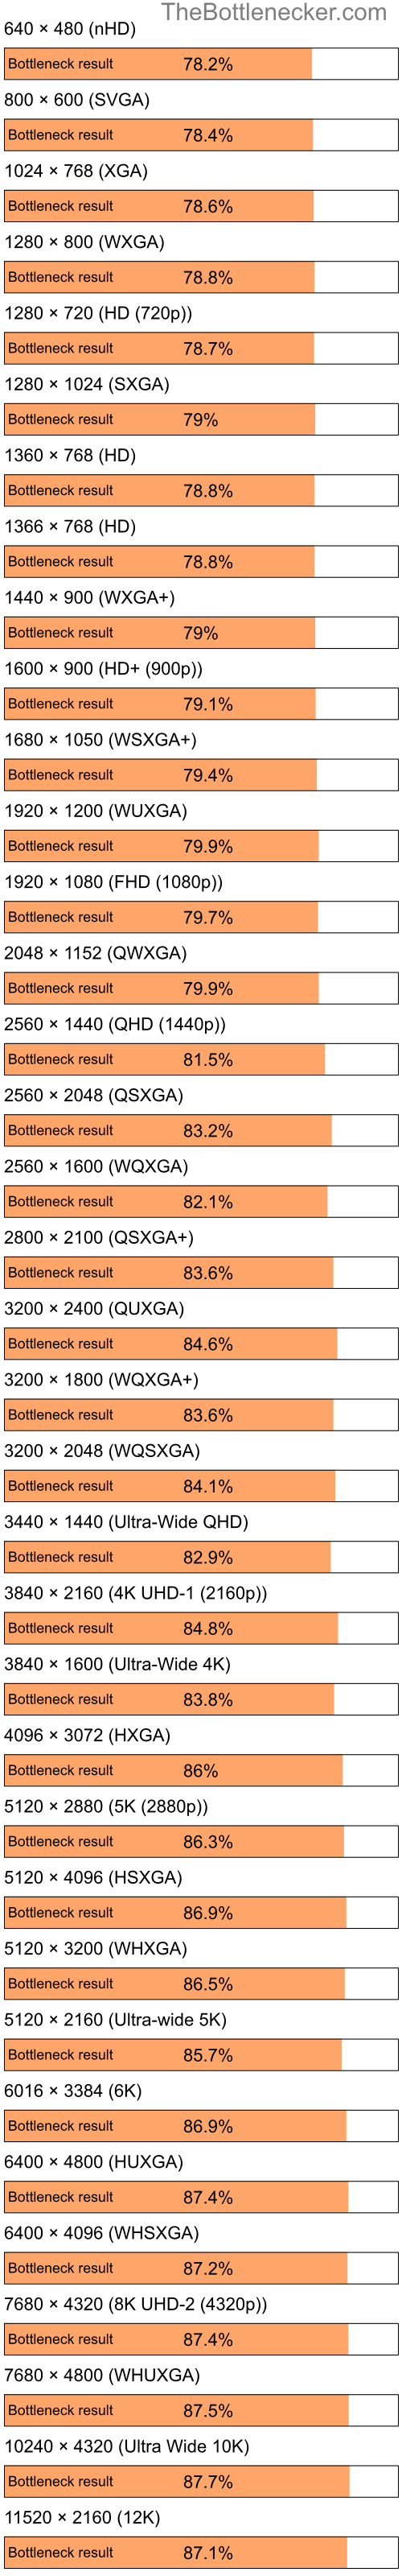 Bottleneck results by resolution for Intel Atom N270 and NVIDIA GeForce 7025 in7 Days to Die